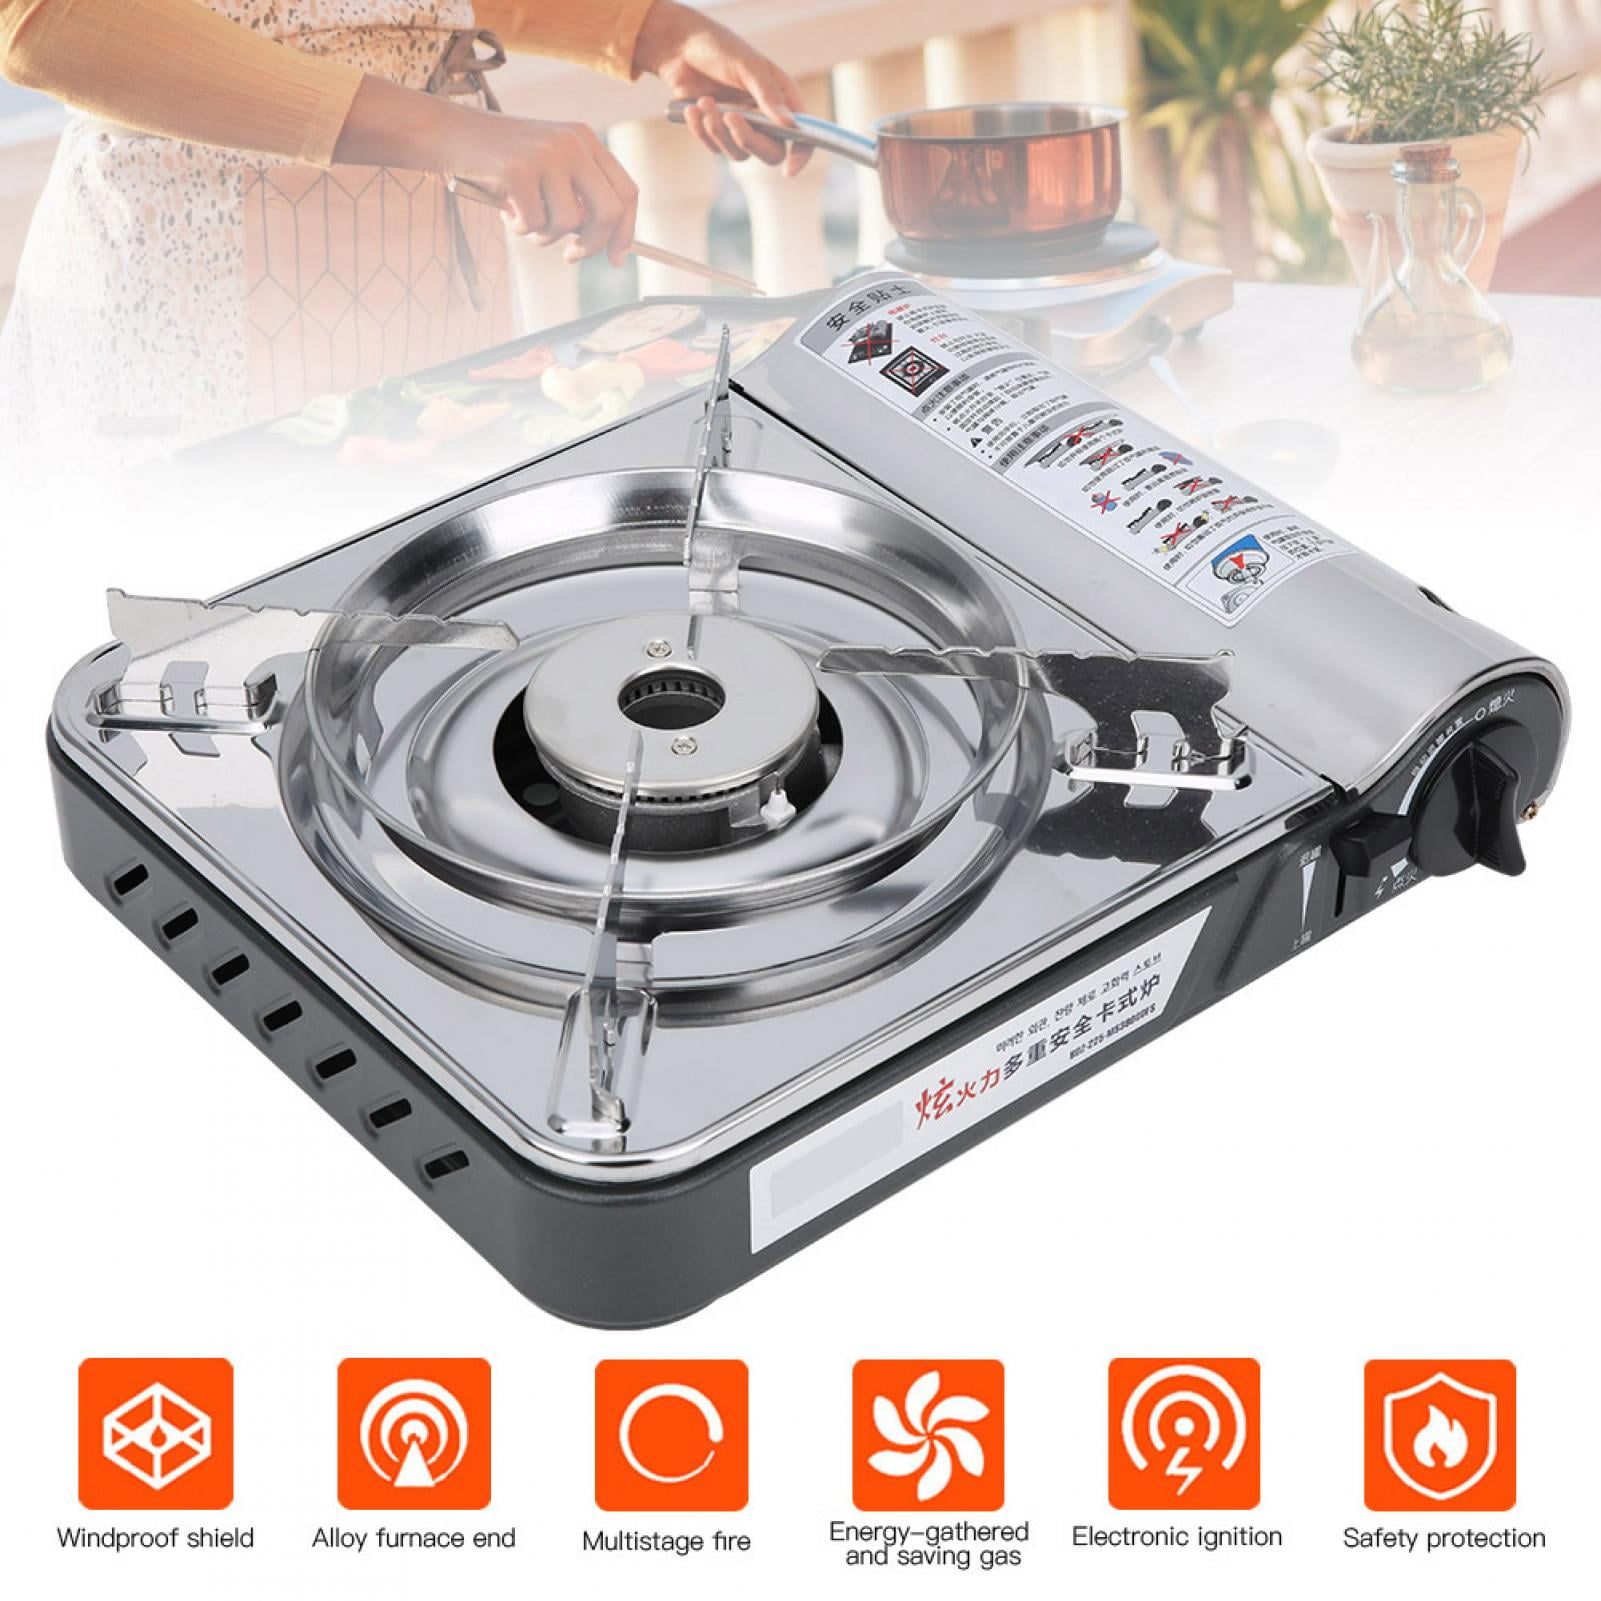 Portable Alcohol Stove Heater Stainless Steel Camping Spirit Burner Cooker 